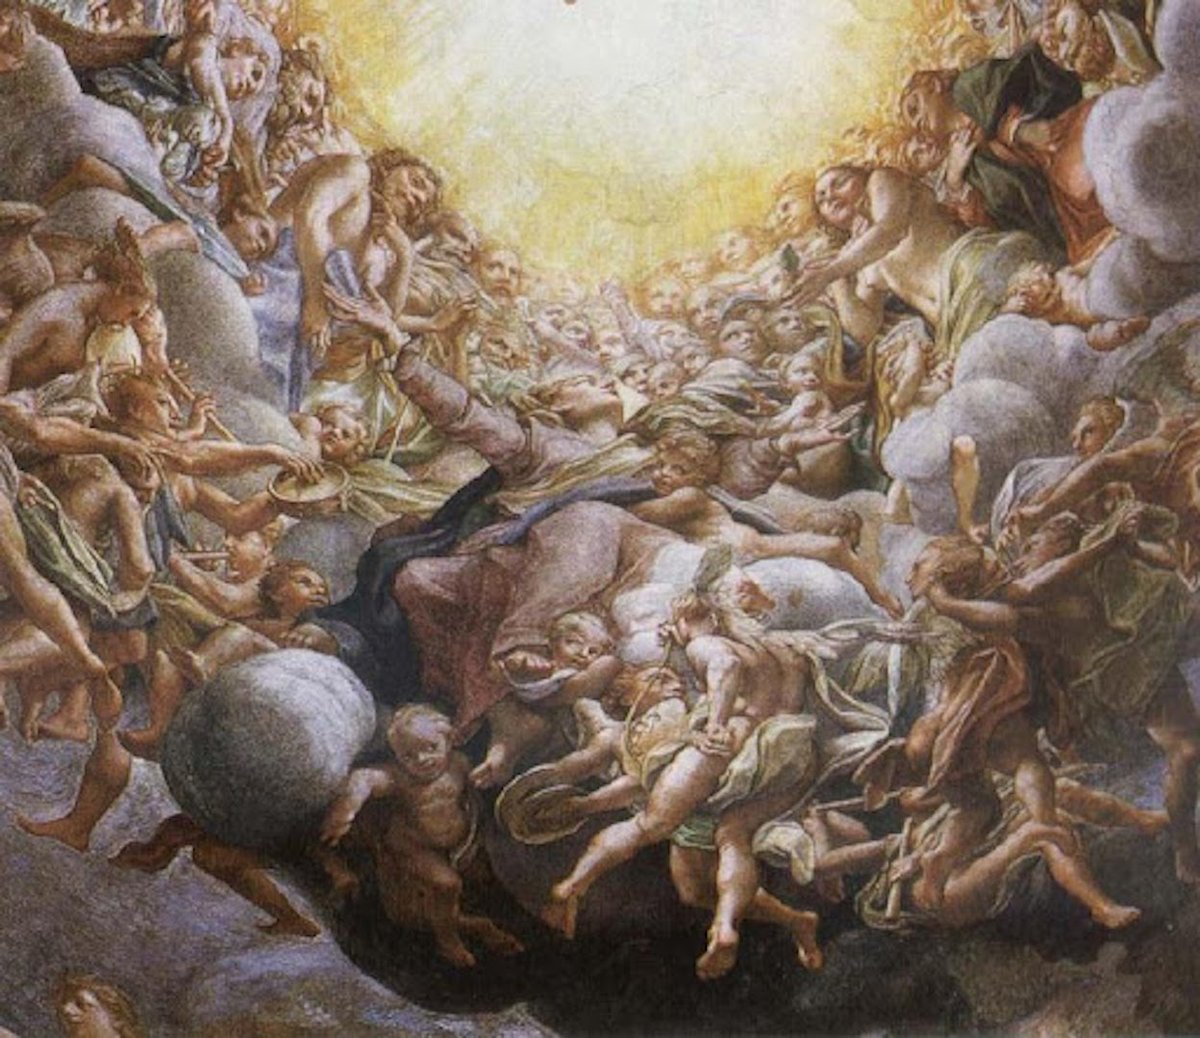 THREAD: Problems depicting HEAVEN # 1: Overpopulation.Renaissance painters attempted to depict the vast number of saved souls in heaven plus the hierarchy of angels. The result: heaven is depicted as overpopulated & cramped. HellishCorreggio - Assumption of the Virgin (1522-30)